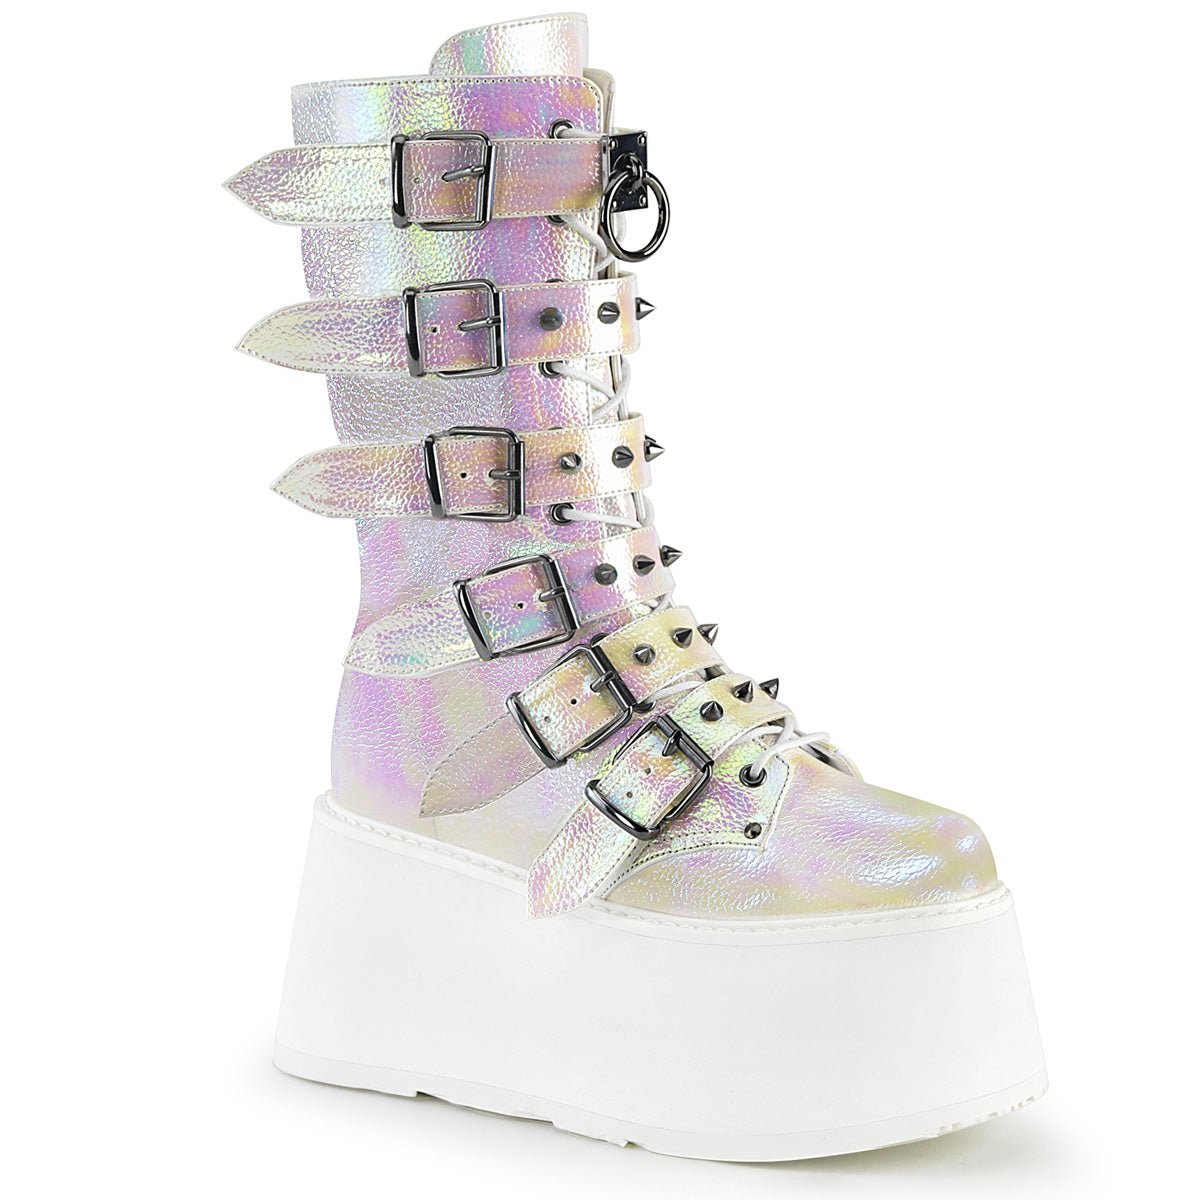 Too Fast | Demonia Damned 225 | Pearl Iridescent Vegan Leather Women's Mid Calf Boots